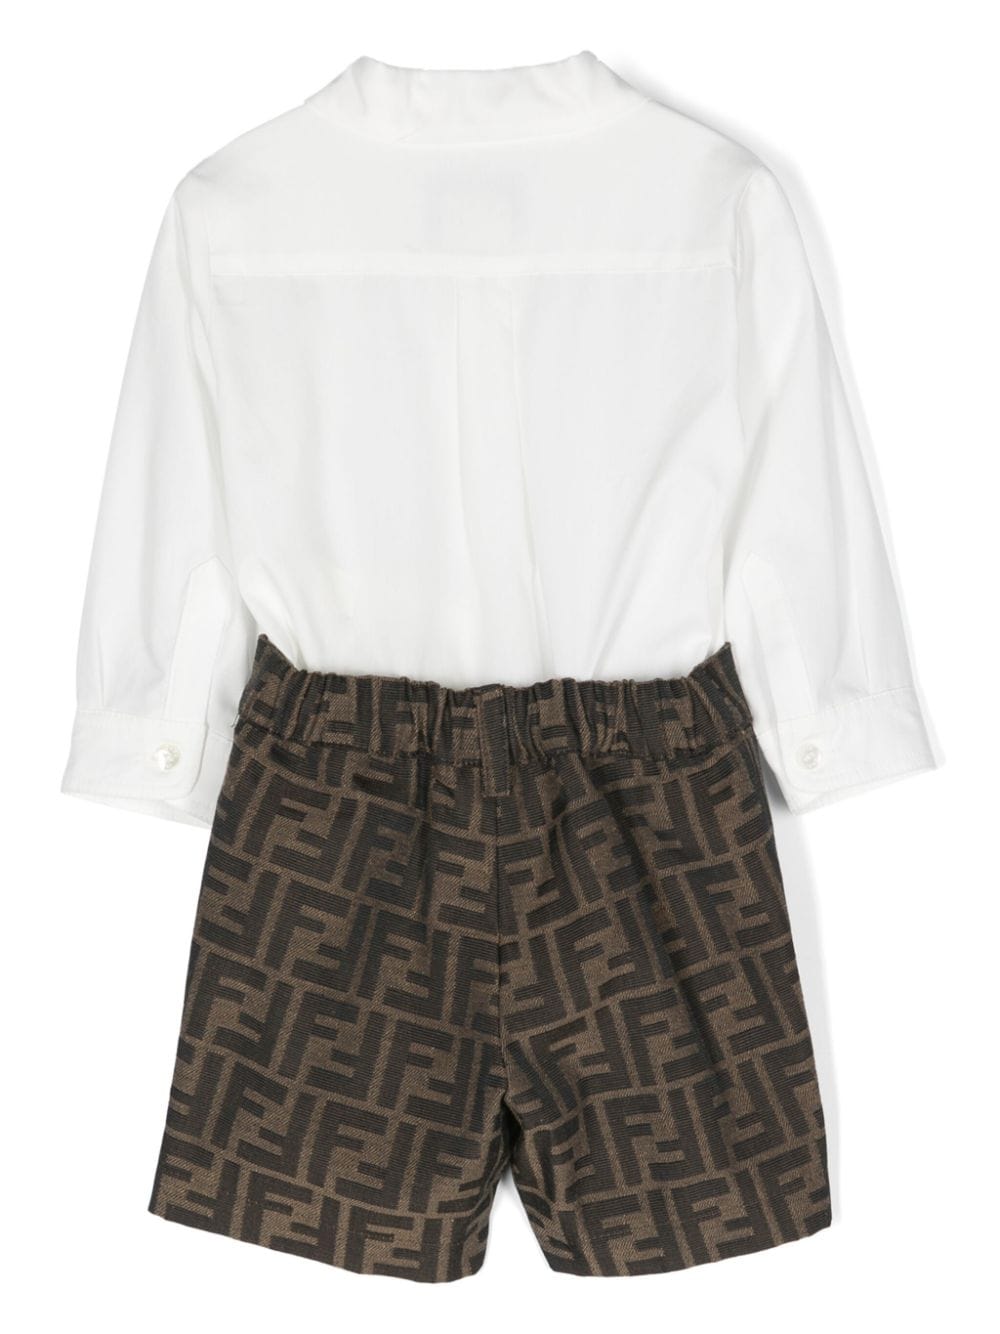 Elegant white and brown outfit for newborns